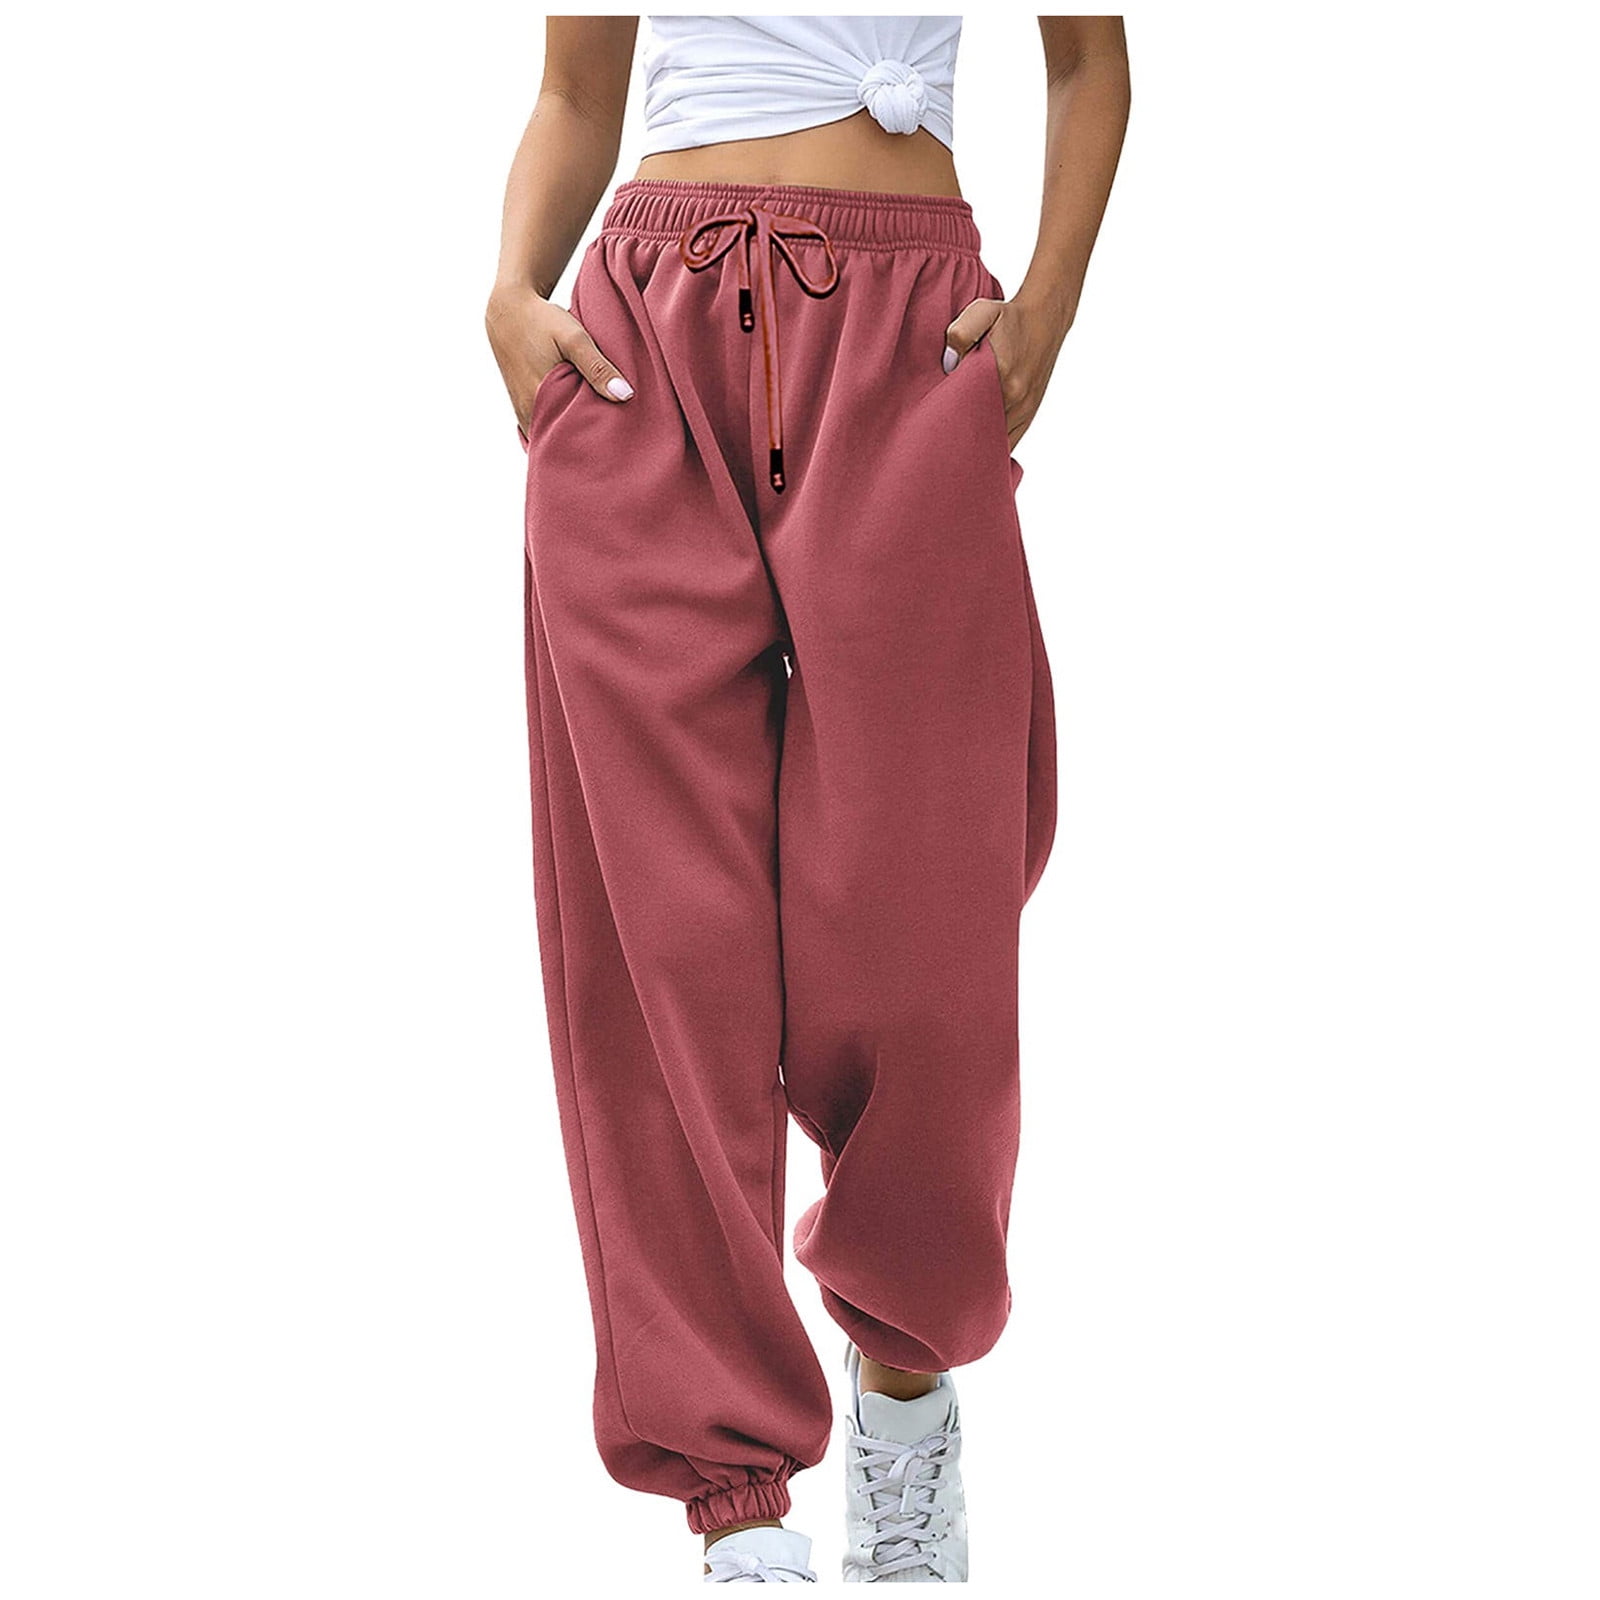 Knosfe Petite Sweatpants for Women Drawstring Cinch Bottom Running Cute  Sweatpants Teens High Waisted Teen Girls Women Joggers Wide Leg Comfortable  with Pockets Loose Baggy Pants Coffee M 